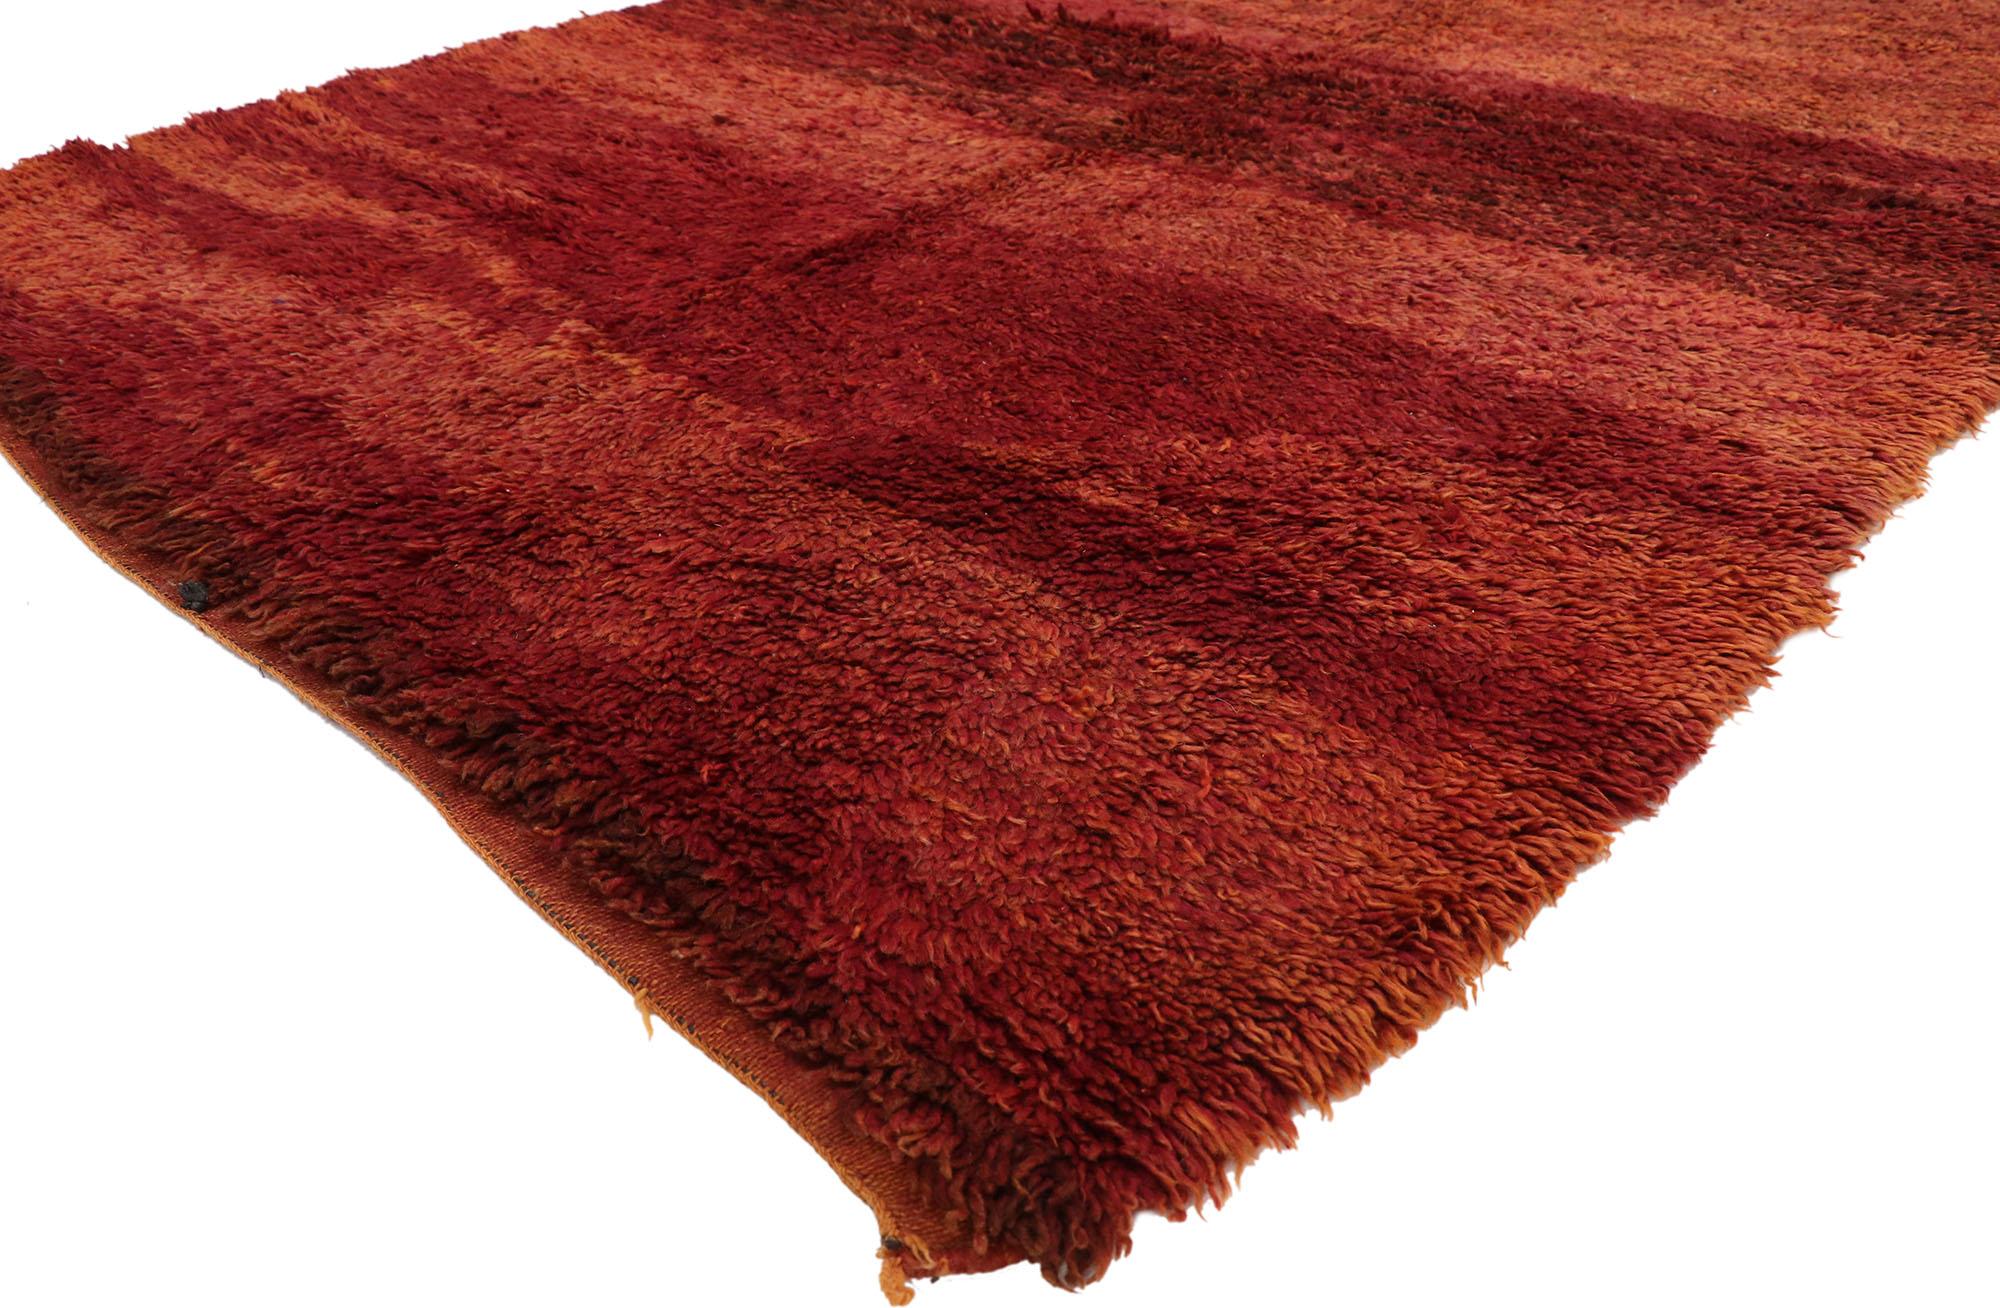 21033 vintage Berber Moroccan rug with warm, Mid-Century Modern style. This hand knotted wool vintage Moroccan rug emanates function and versatility while staying true to the authentic spirit of Berber Tribe culture. Featuring rustic brick red hues,